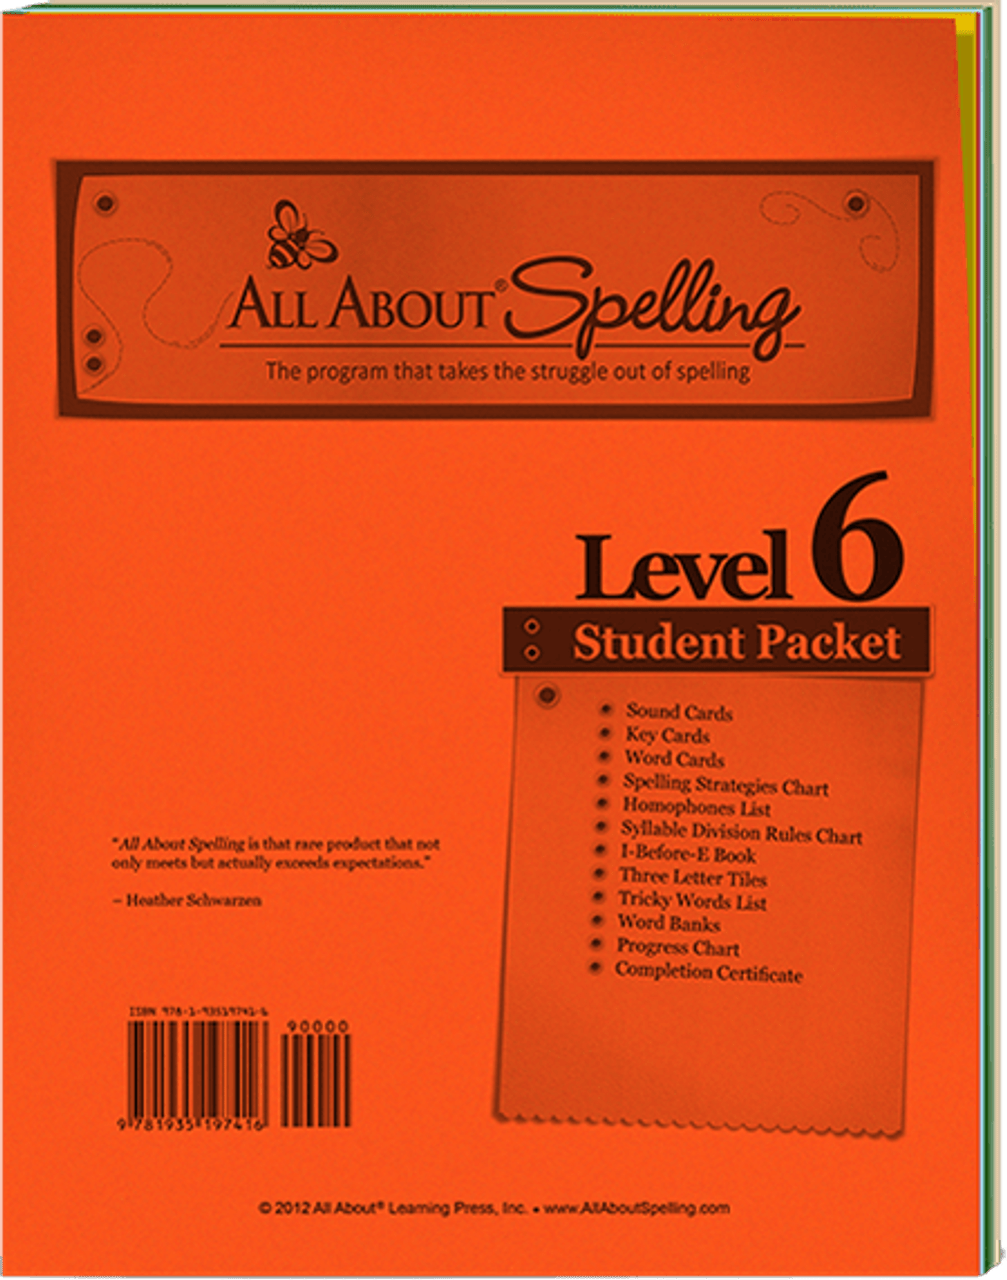 All About Spelling Level 6 Materials - All About Learning Press, Inc.